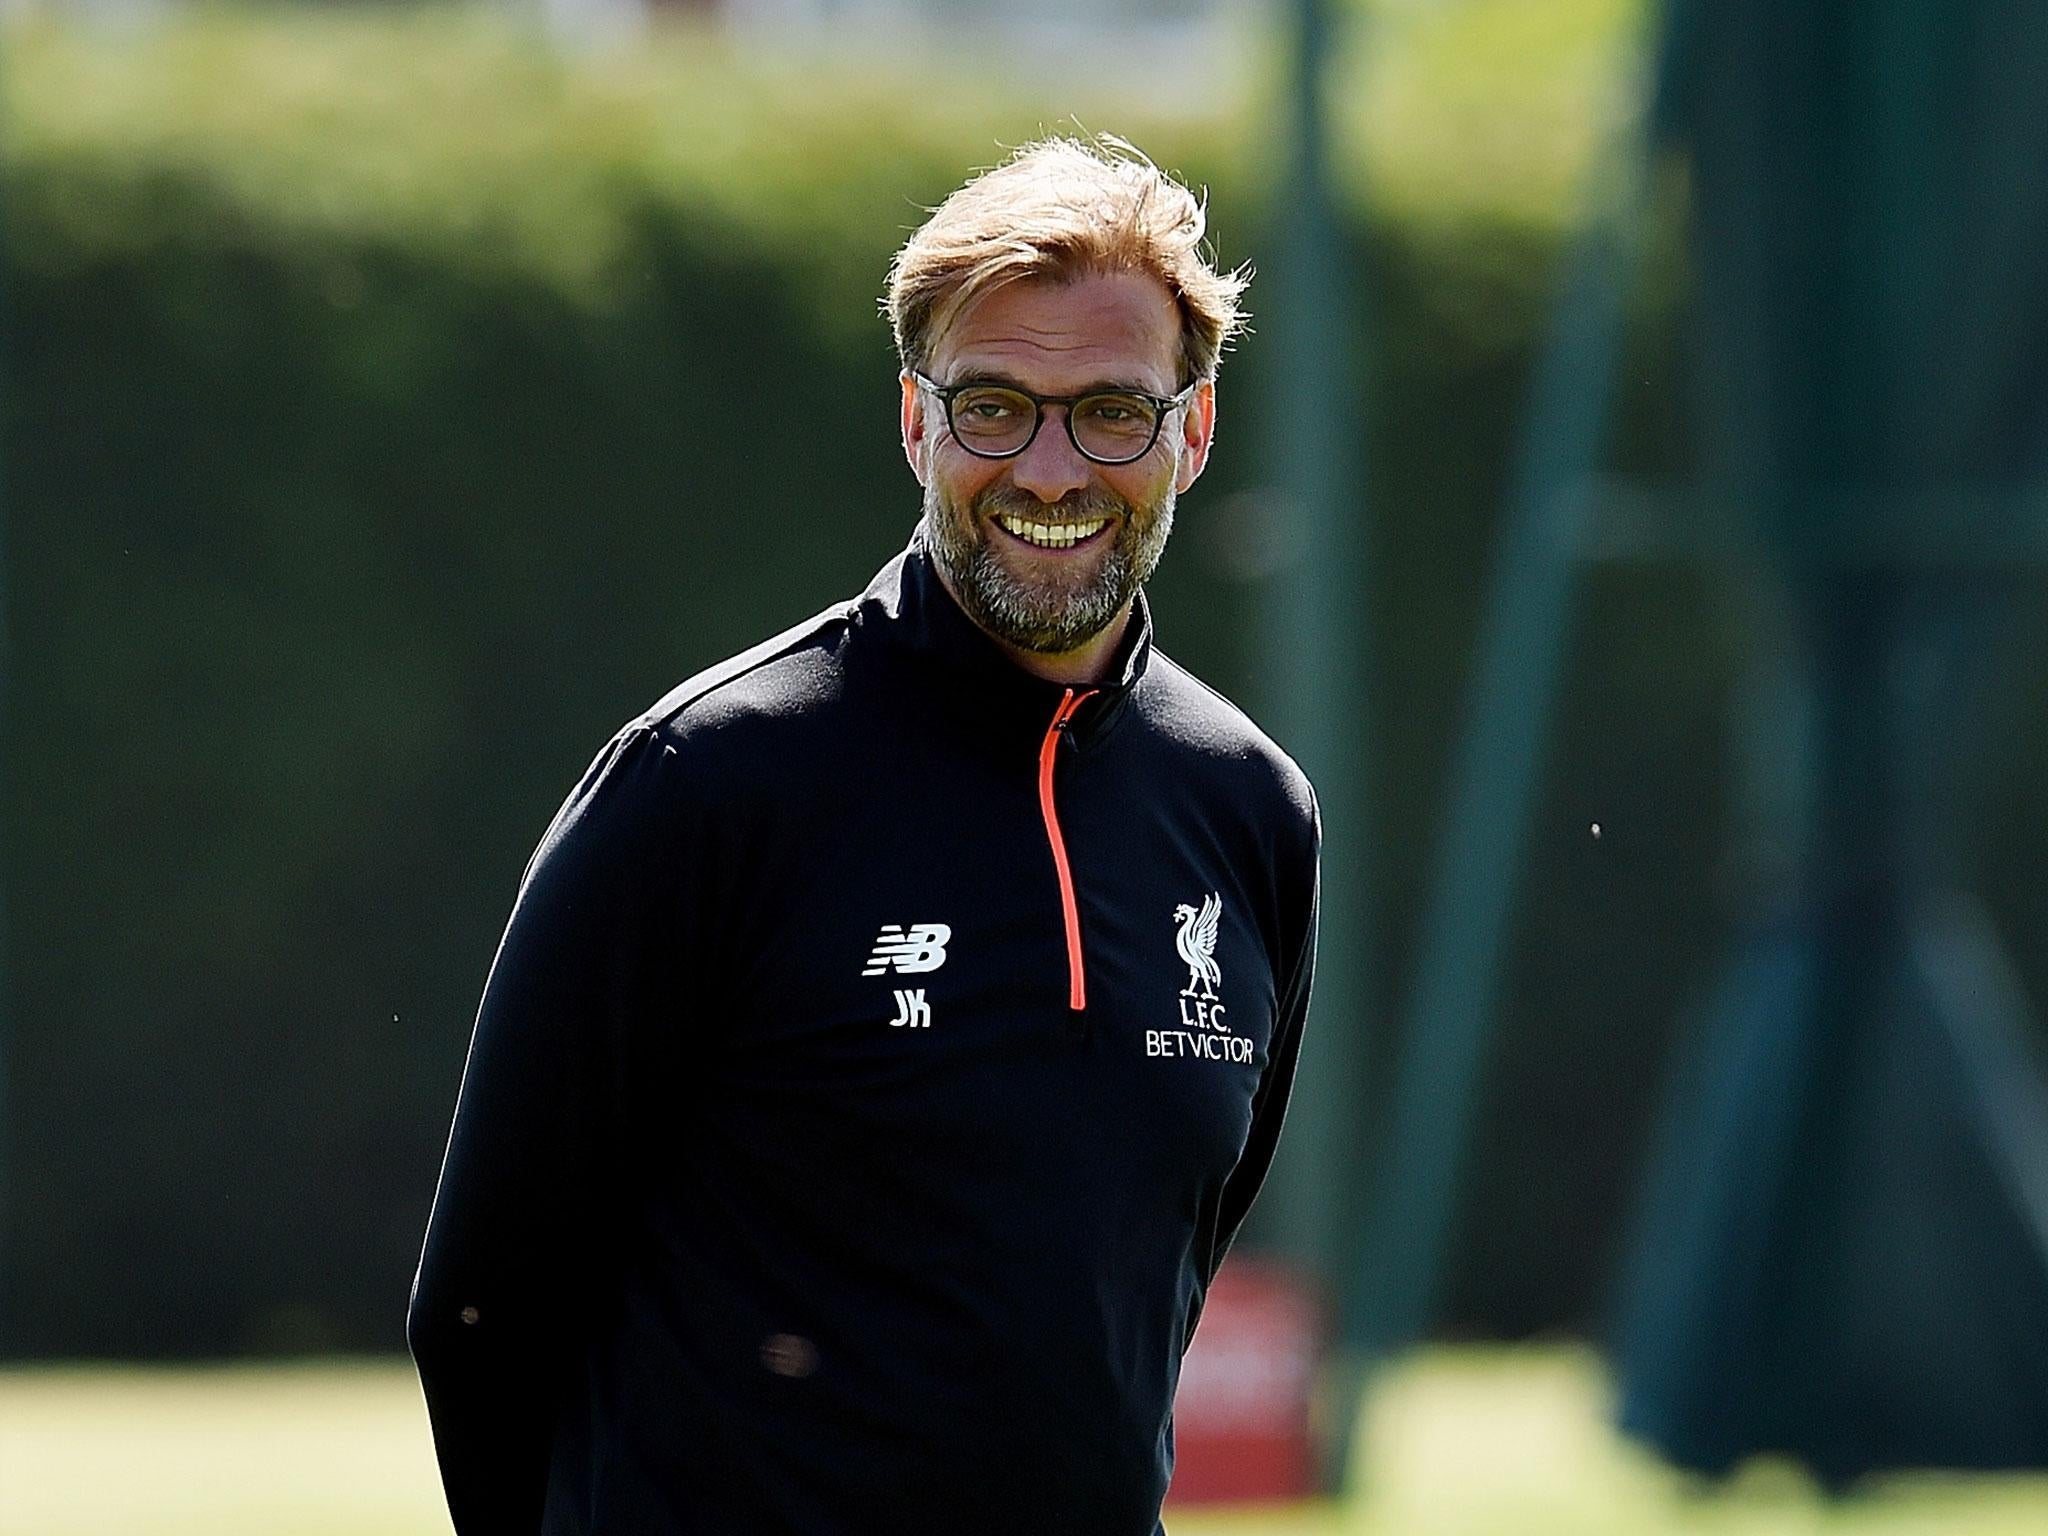 Jurgen Klopp believes Liverpool are closer than the league table indicates